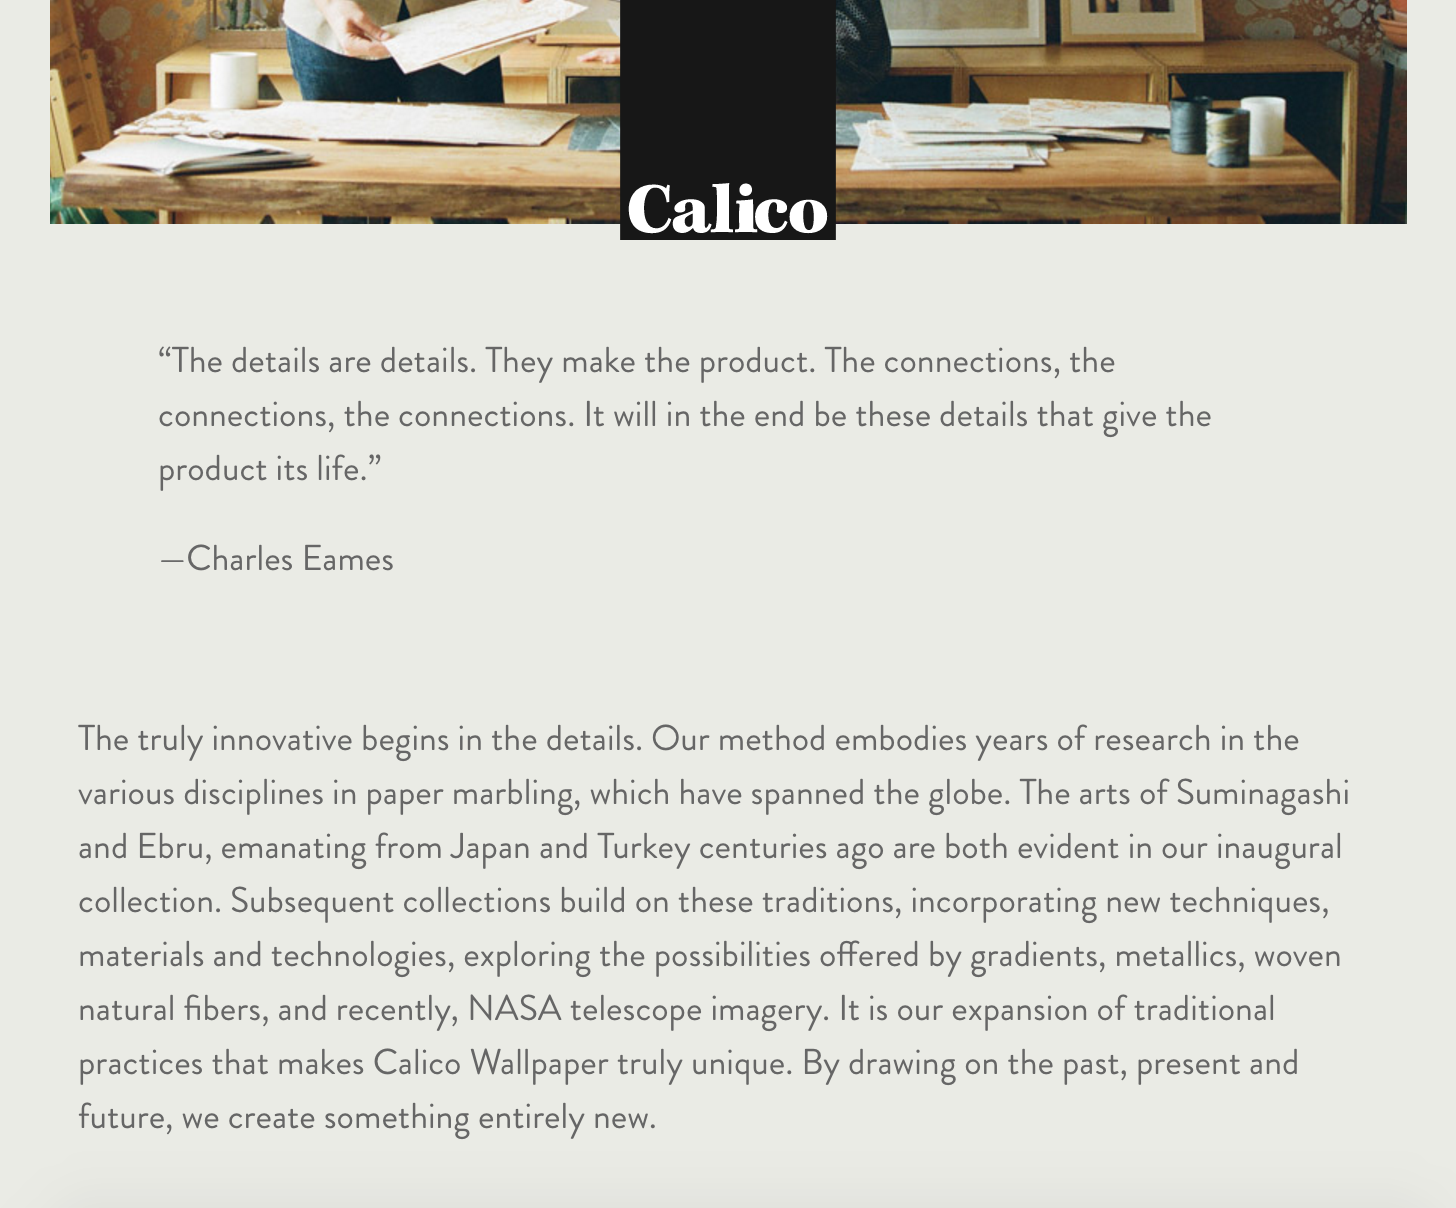 A thoughtful quote and some guiding principles introduce a wallpaper customer to the world of Calico.